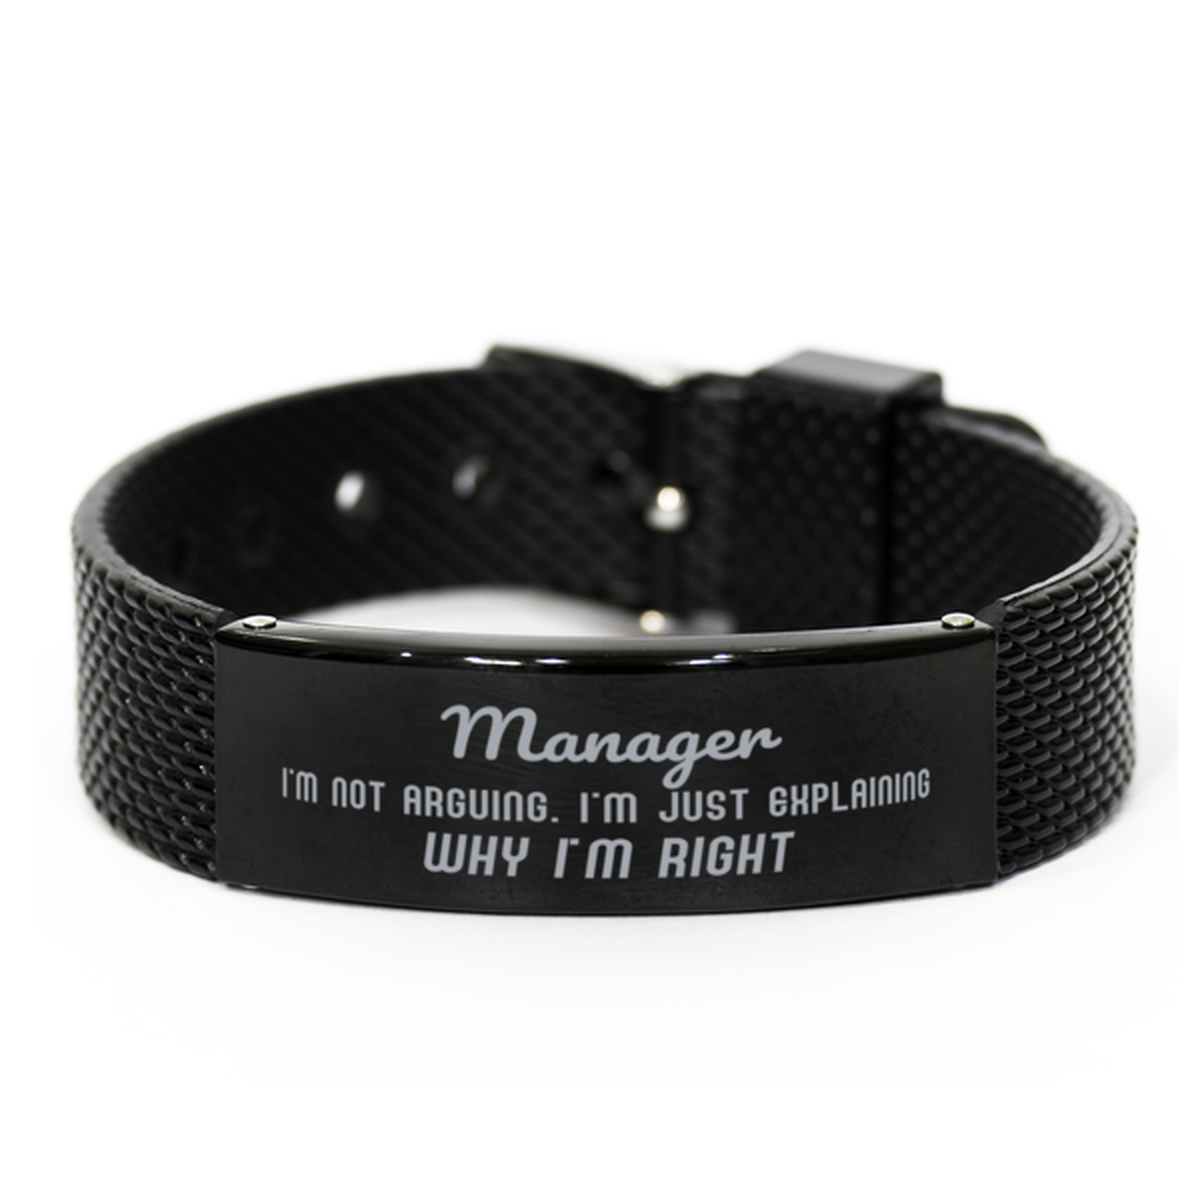 Manager I'm not Arguing. I'm Just Explaining Why I'm RIGHT Black Shark Mesh Bracelet, Funny Saying Quote Manager Gifts For Manager Graduation Birthday Christmas Gifts for Men Women Coworker